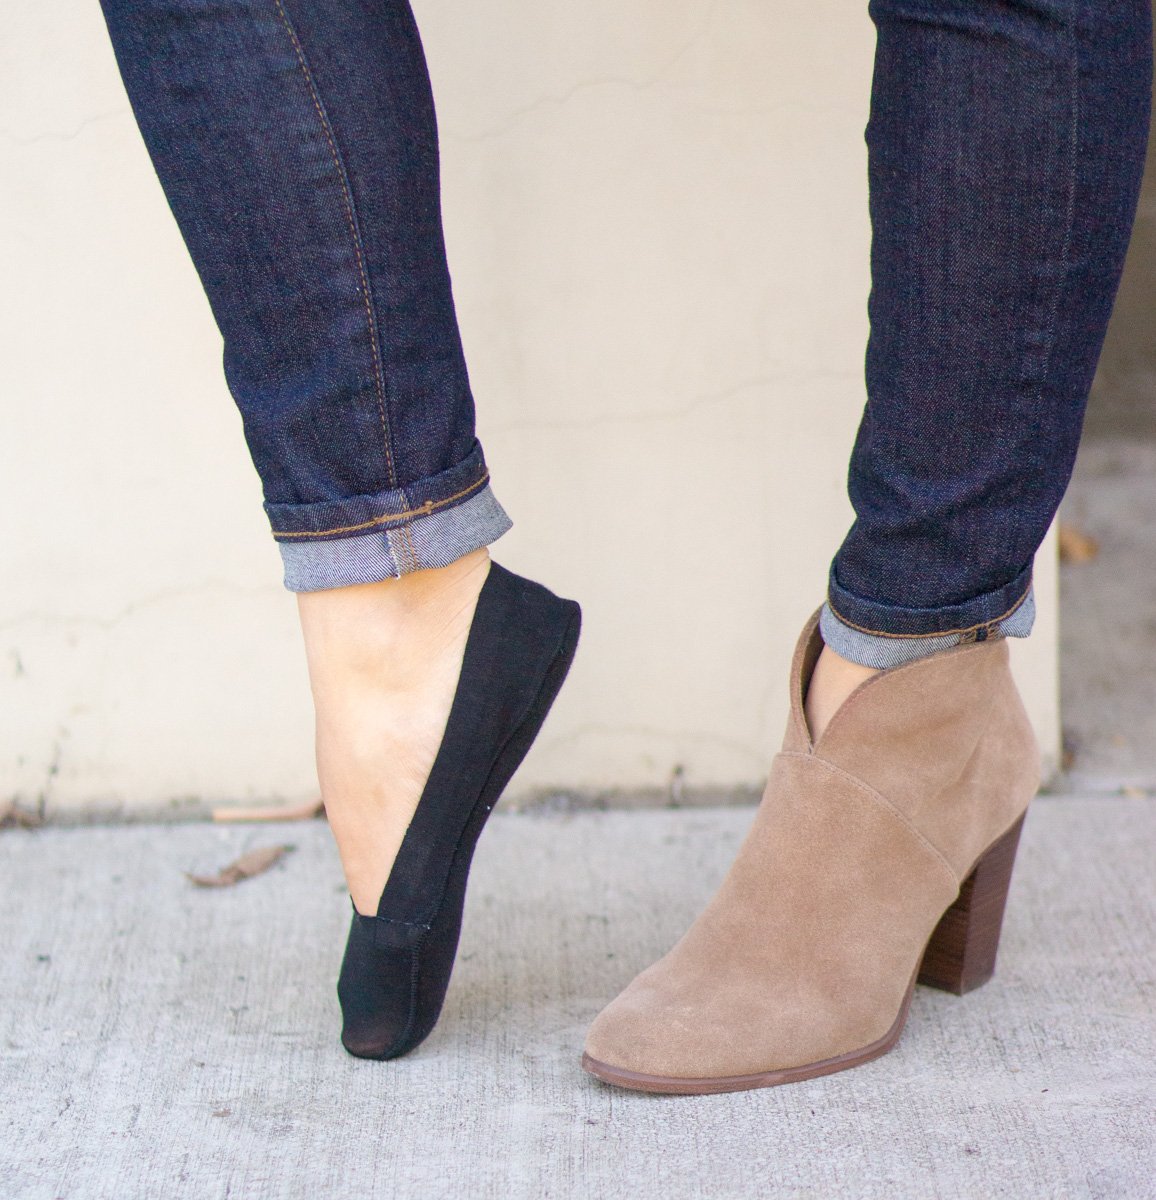 conversion definitely Shabby Best Socks for Ankle Booties, Ballet Flats and Boots | Sheec Socks Review -  Petite Style Script